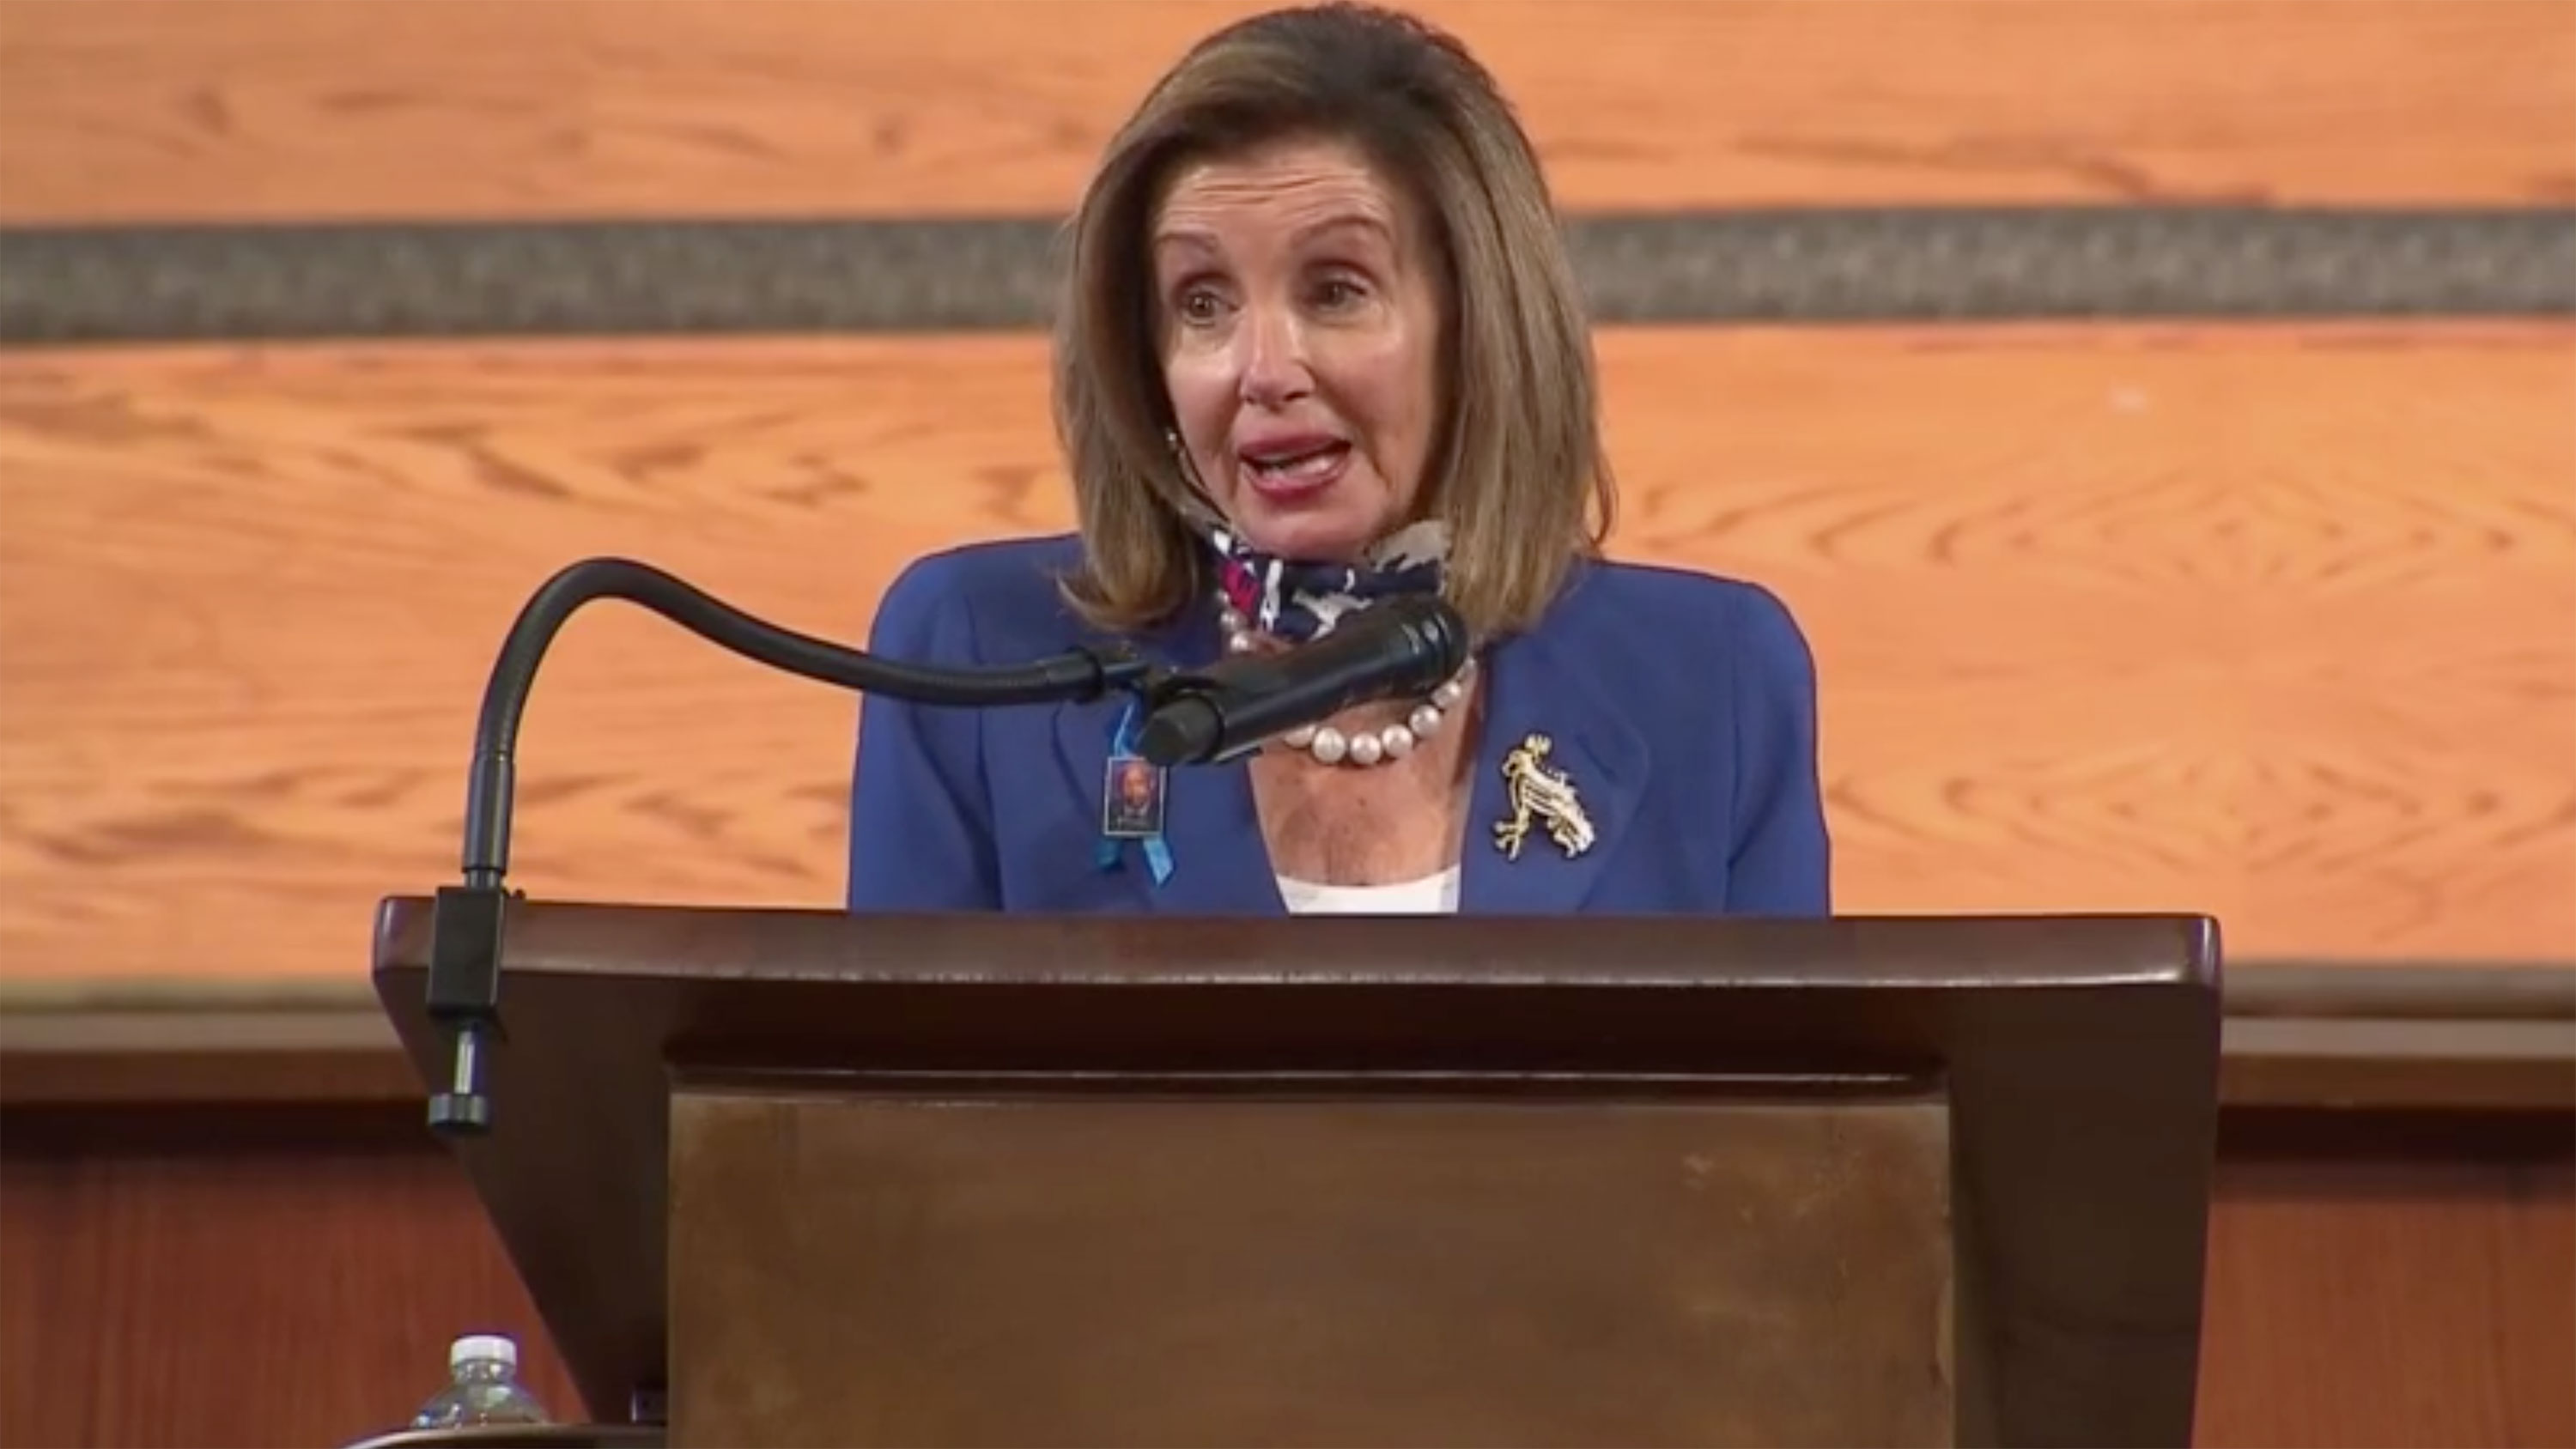 Lewis Insisted On The Truth In The Congress Of The United States Nancy Pelosi Says